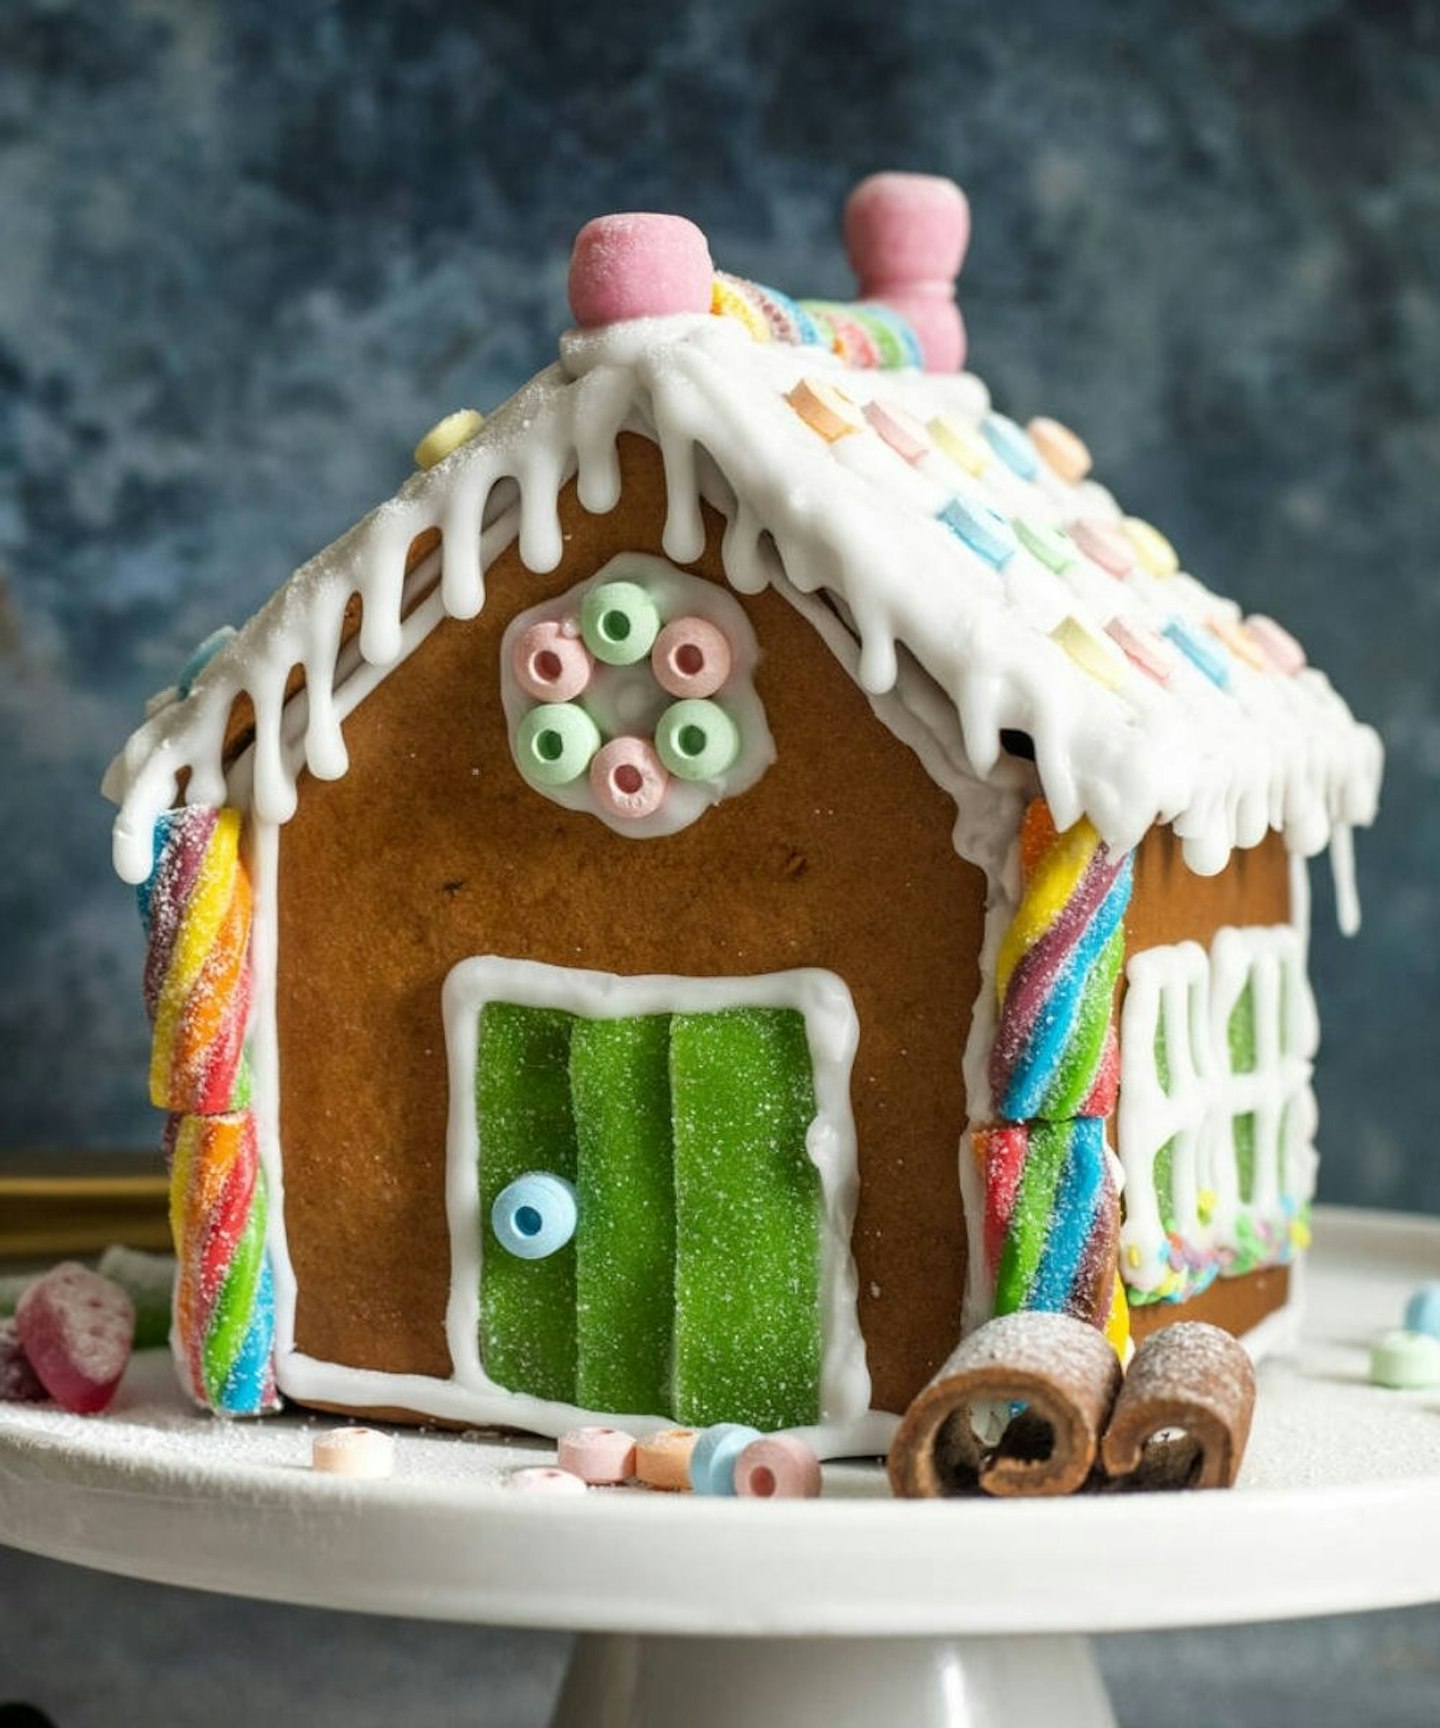 Bake And Build Gingerbread House Kit